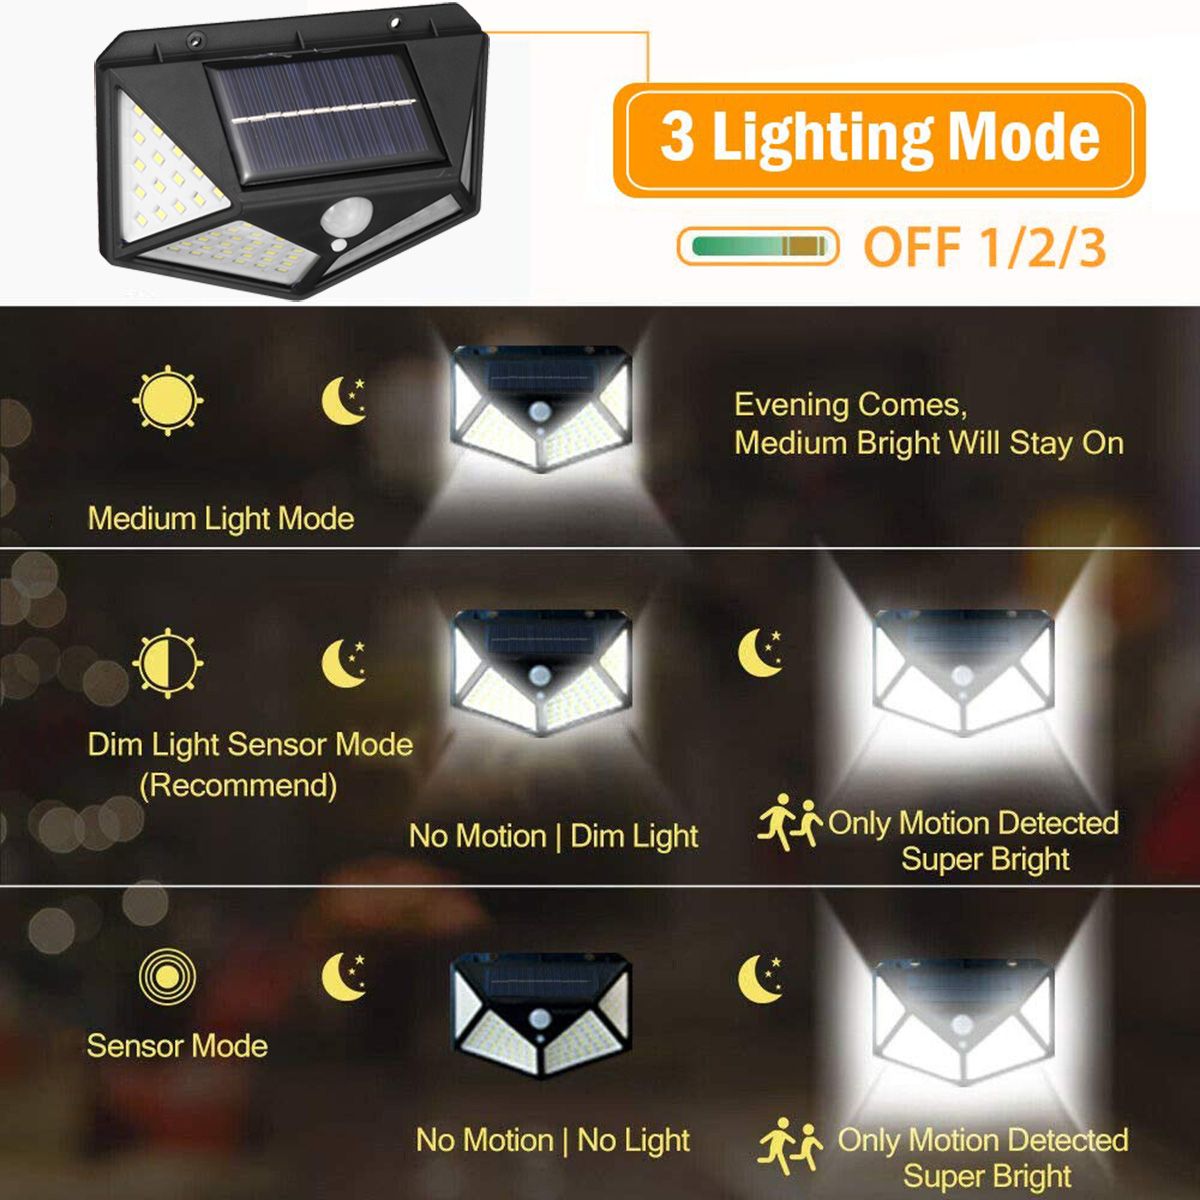 100LED-Solar-Motion-Sensor-Wall-Light-Outdoor-Garden-Lamp-Waterproof-Security-Lighting-for-Home-Path-1754953